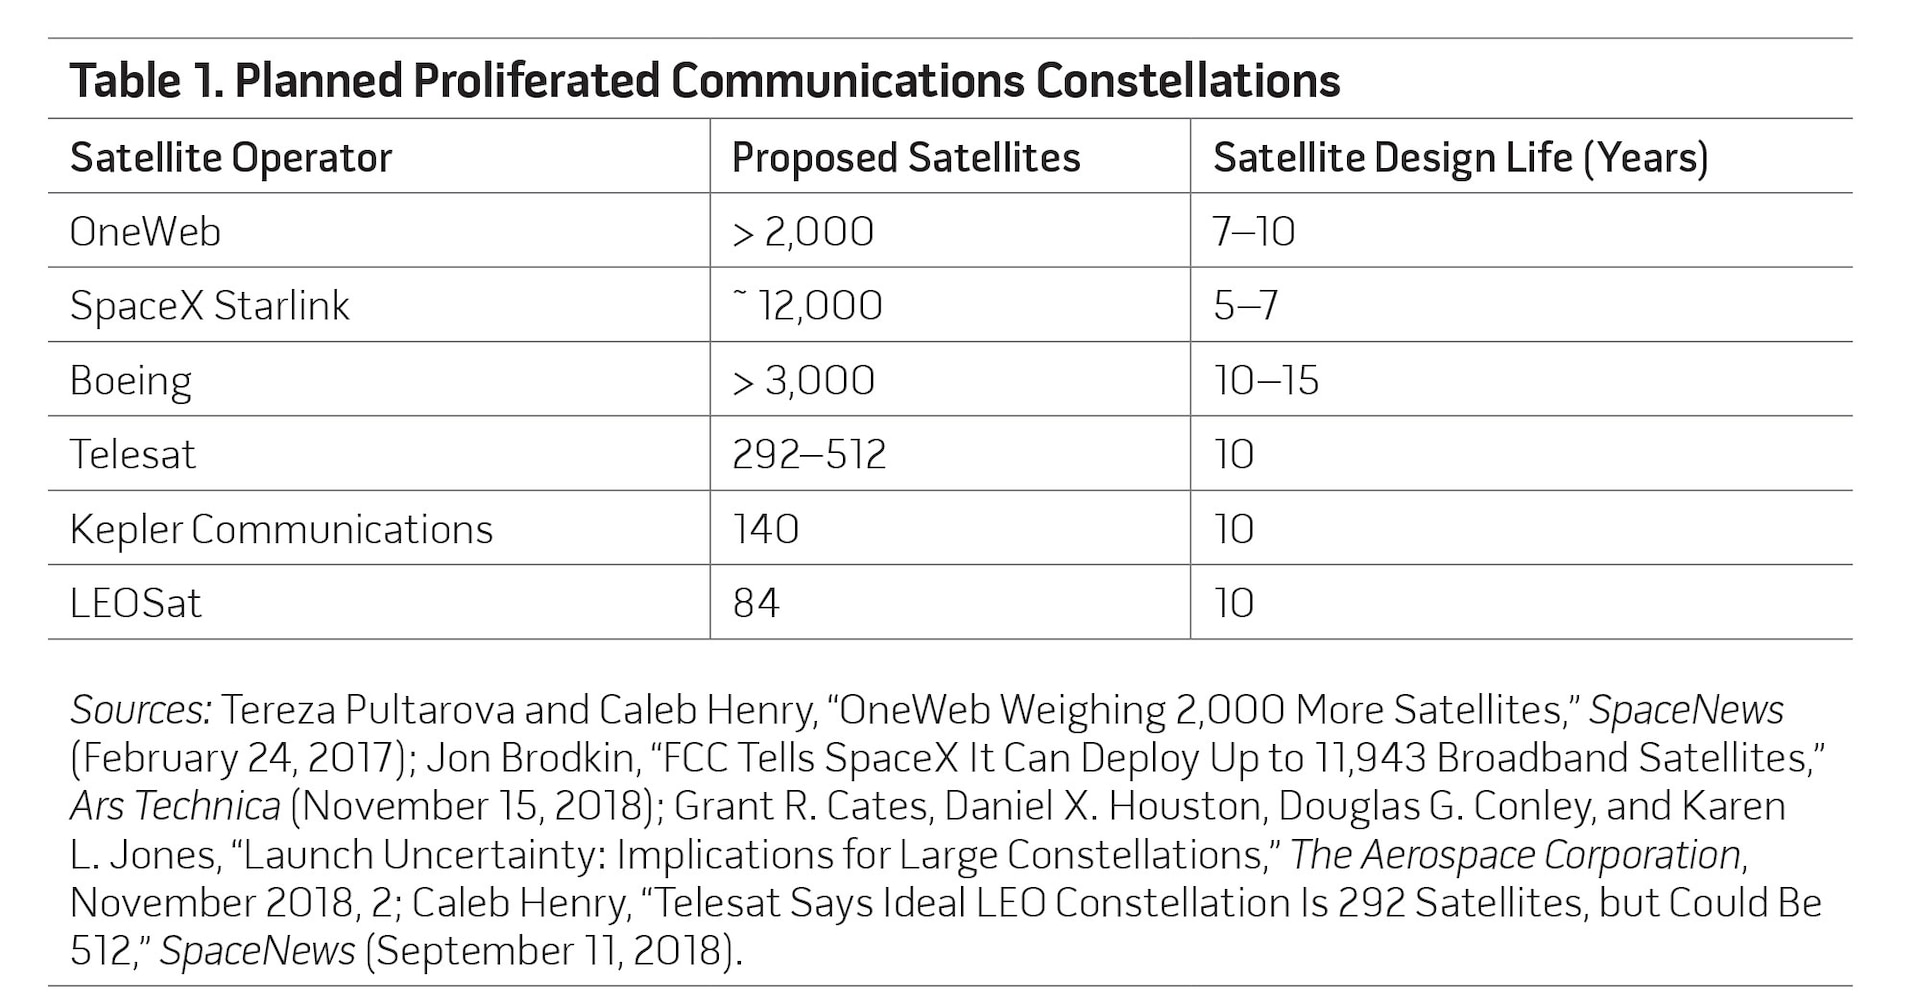 Table 1. Planned Proliferated Communications Constellations